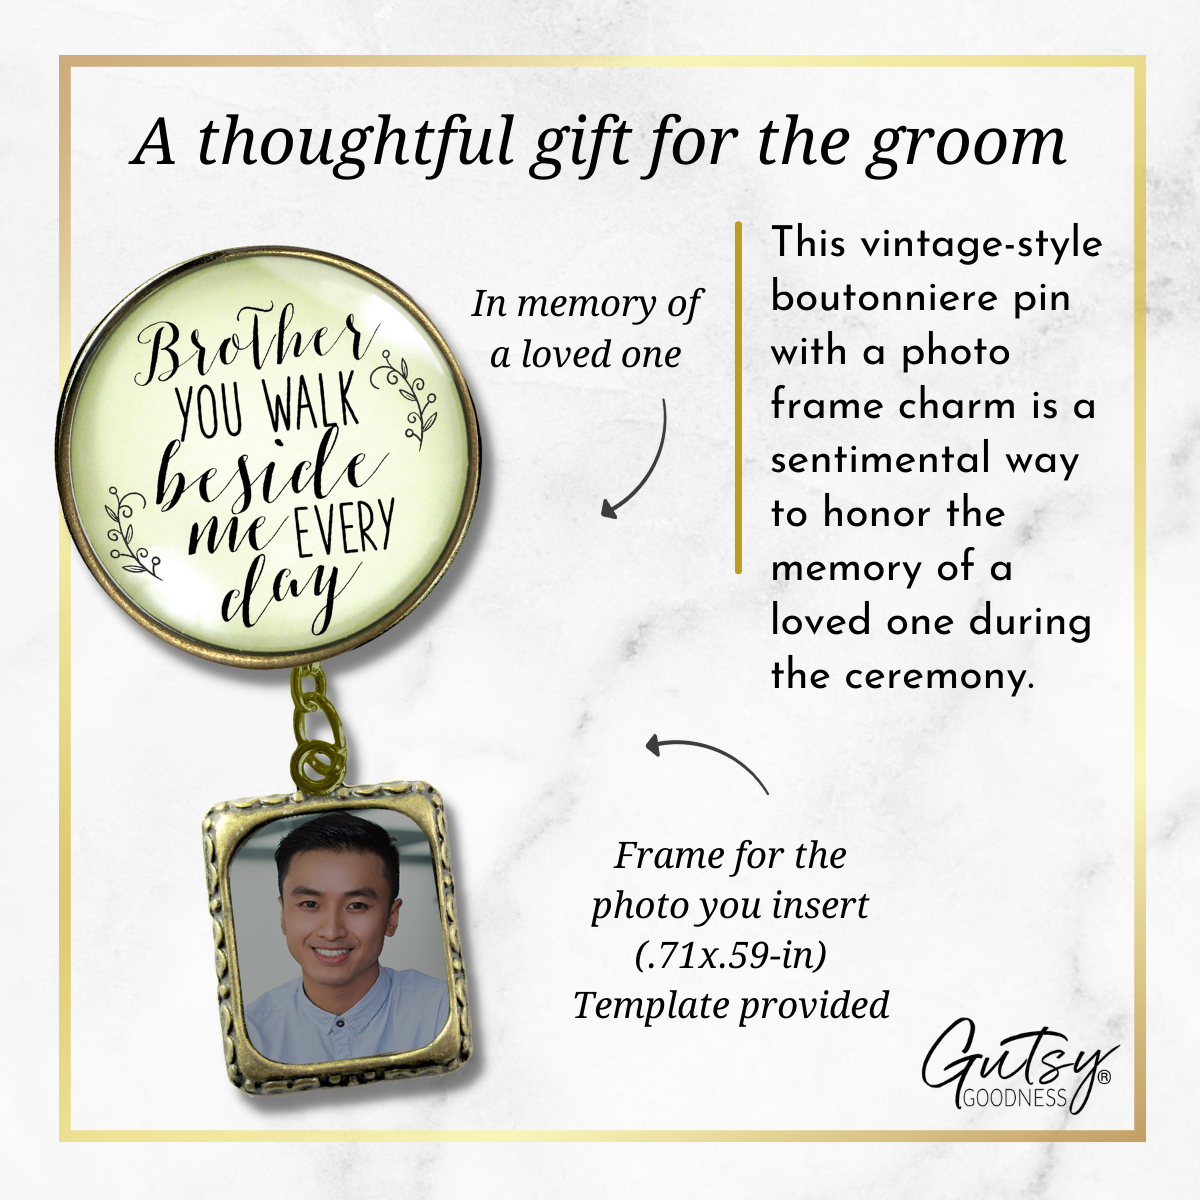 Wedding Memorial Boutonniere Pin Photo Frame Honor Brother Vintage Cream For Men - Gutsy Goodness